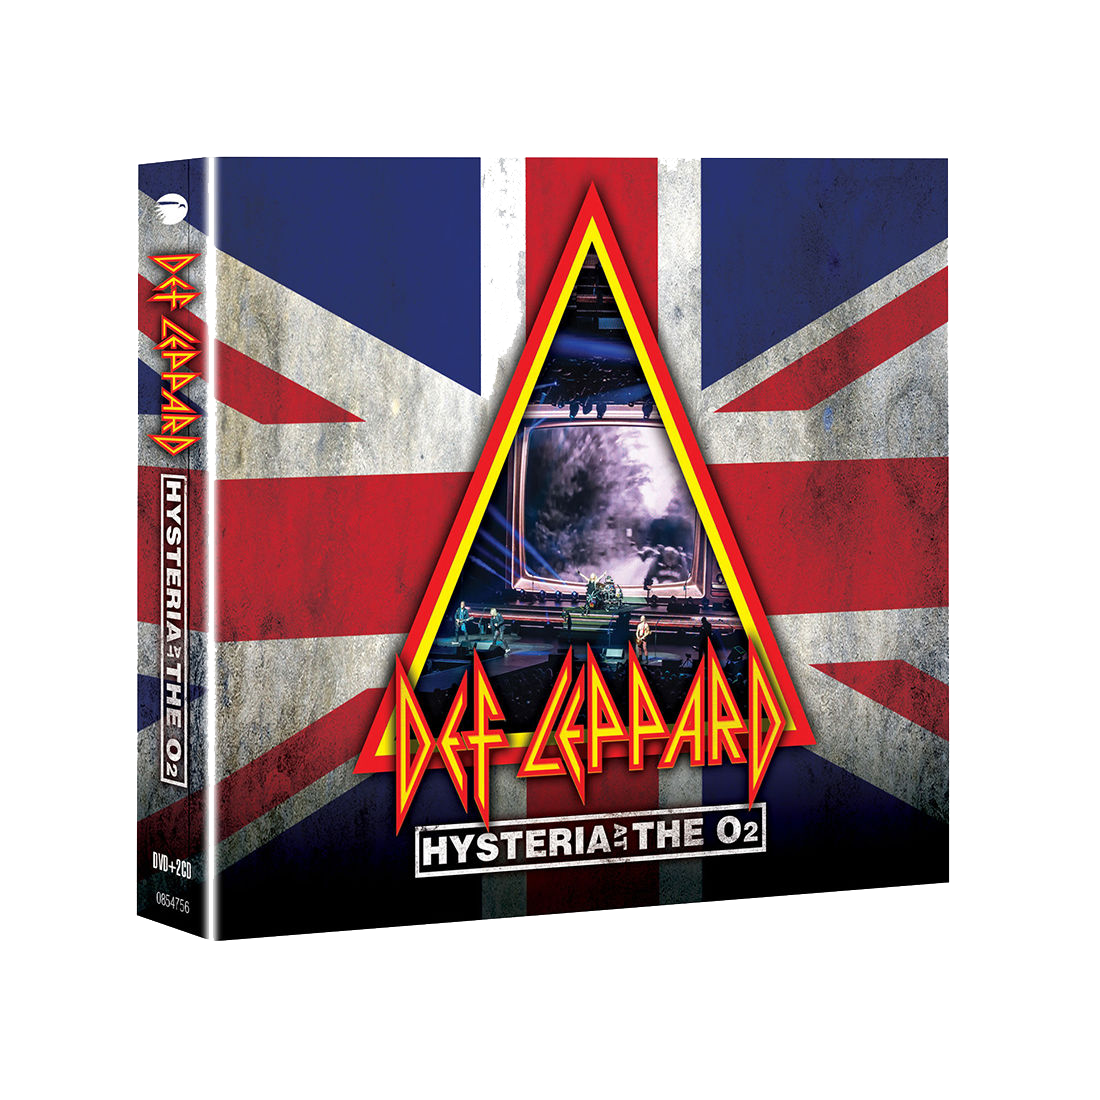 Def Leppard - Hysteria At The O2: DVD + 2CD